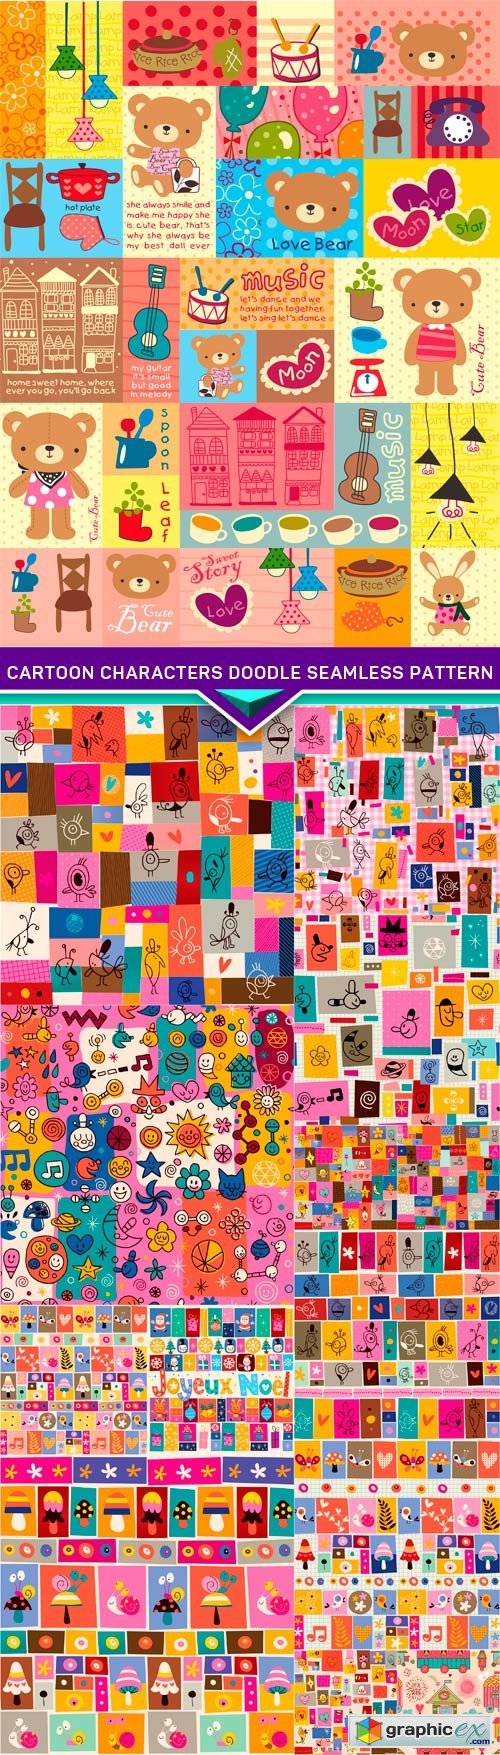 Cartoon characters doodle seamless pattern 14X EPS